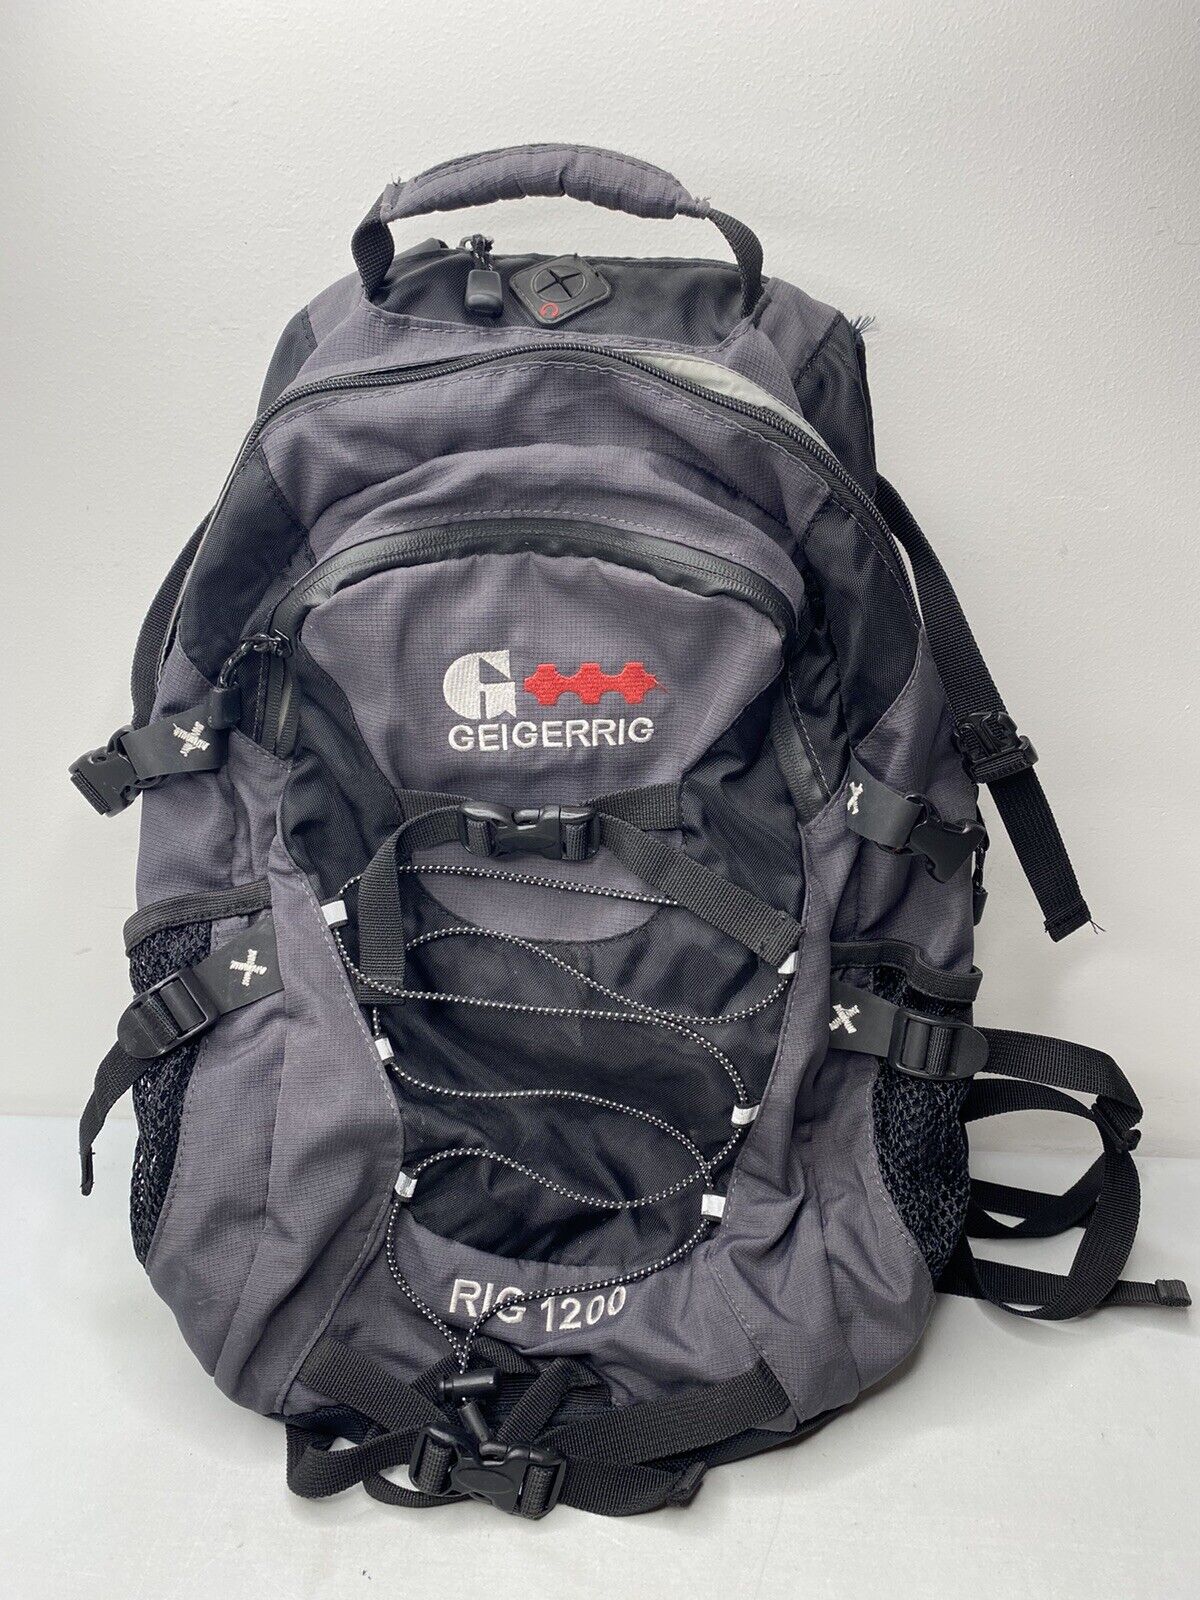 Geigerrig Rig 1200 Hydration Backpack Tucson Mall and Without Max 74% OFF Pack Bladder D